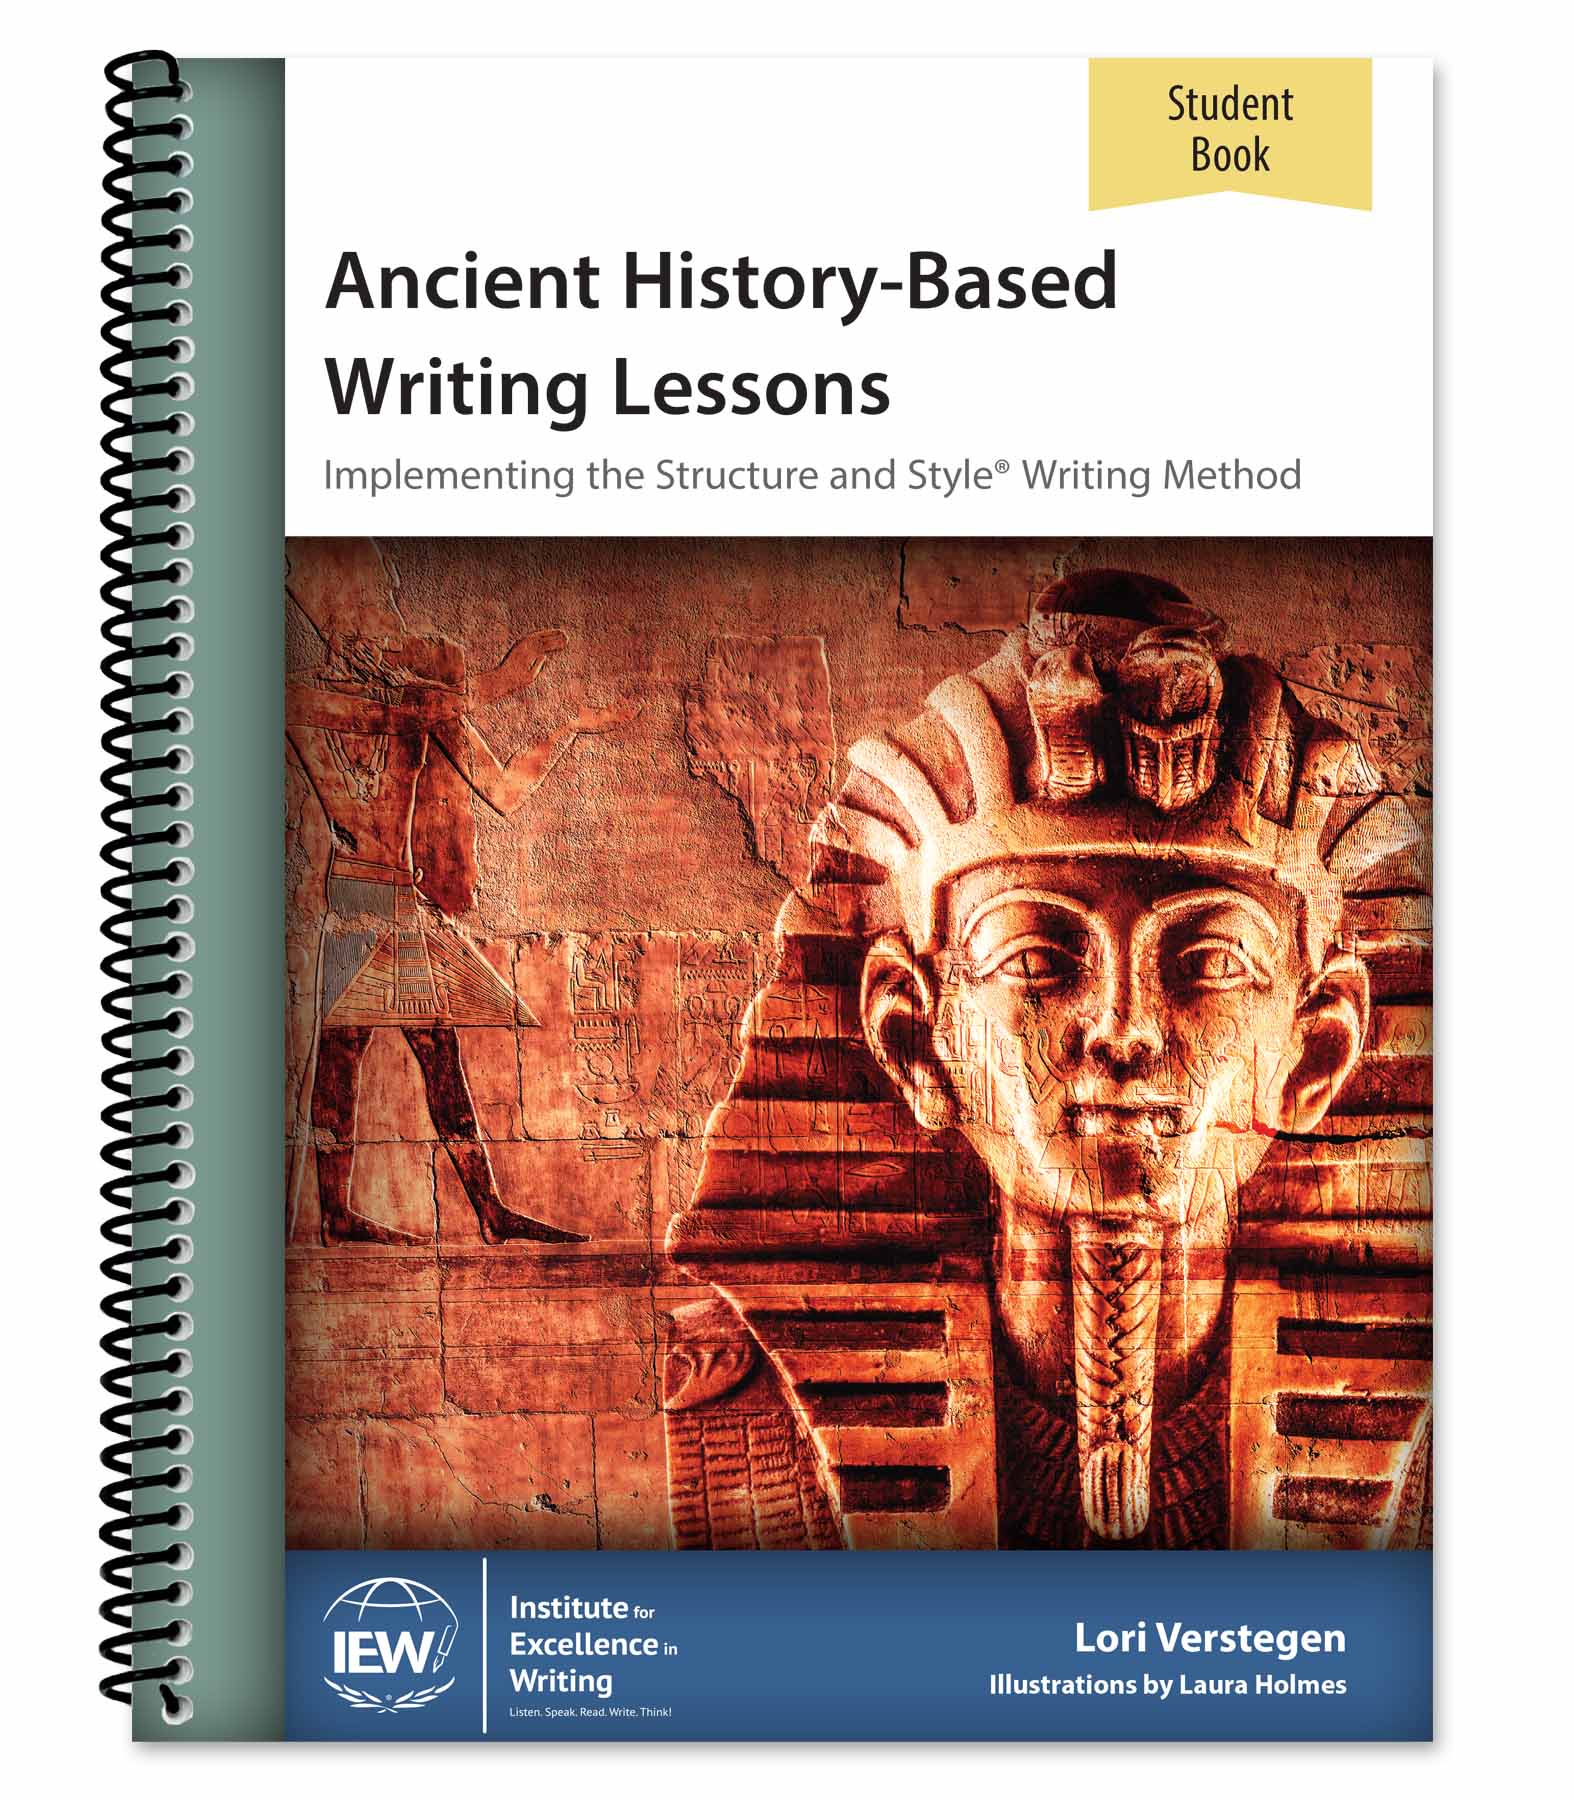 Ancient History-Based Writing Lessons [Student Book only]